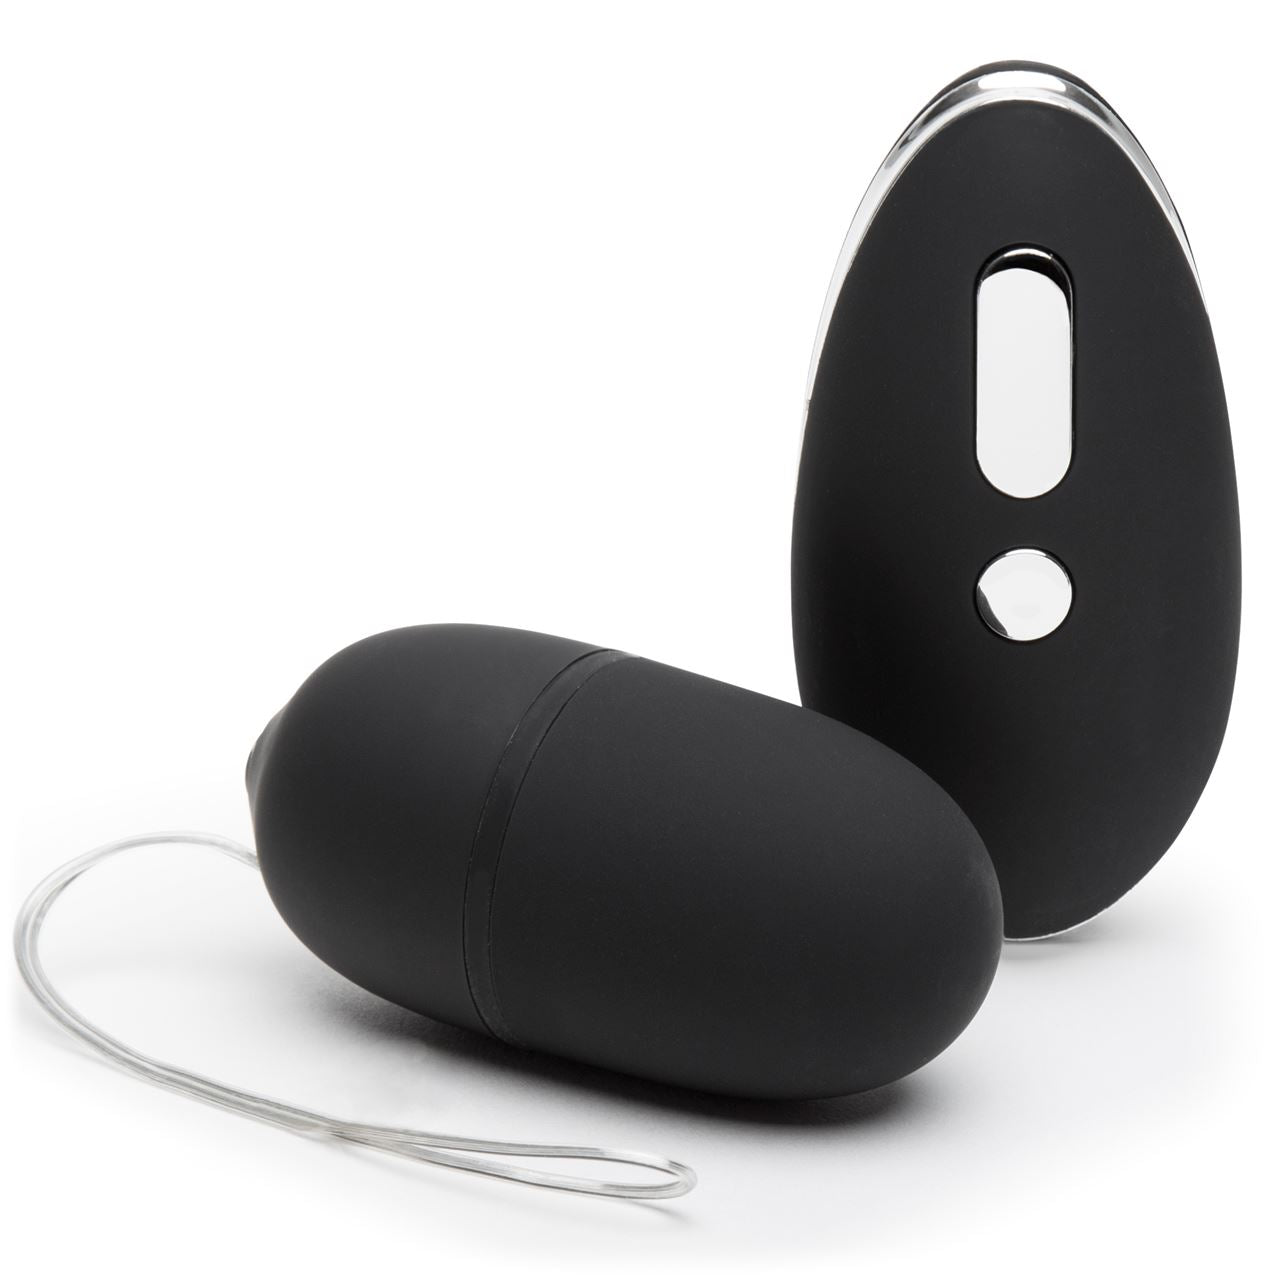 remote-controlled vibrating sex toys uk